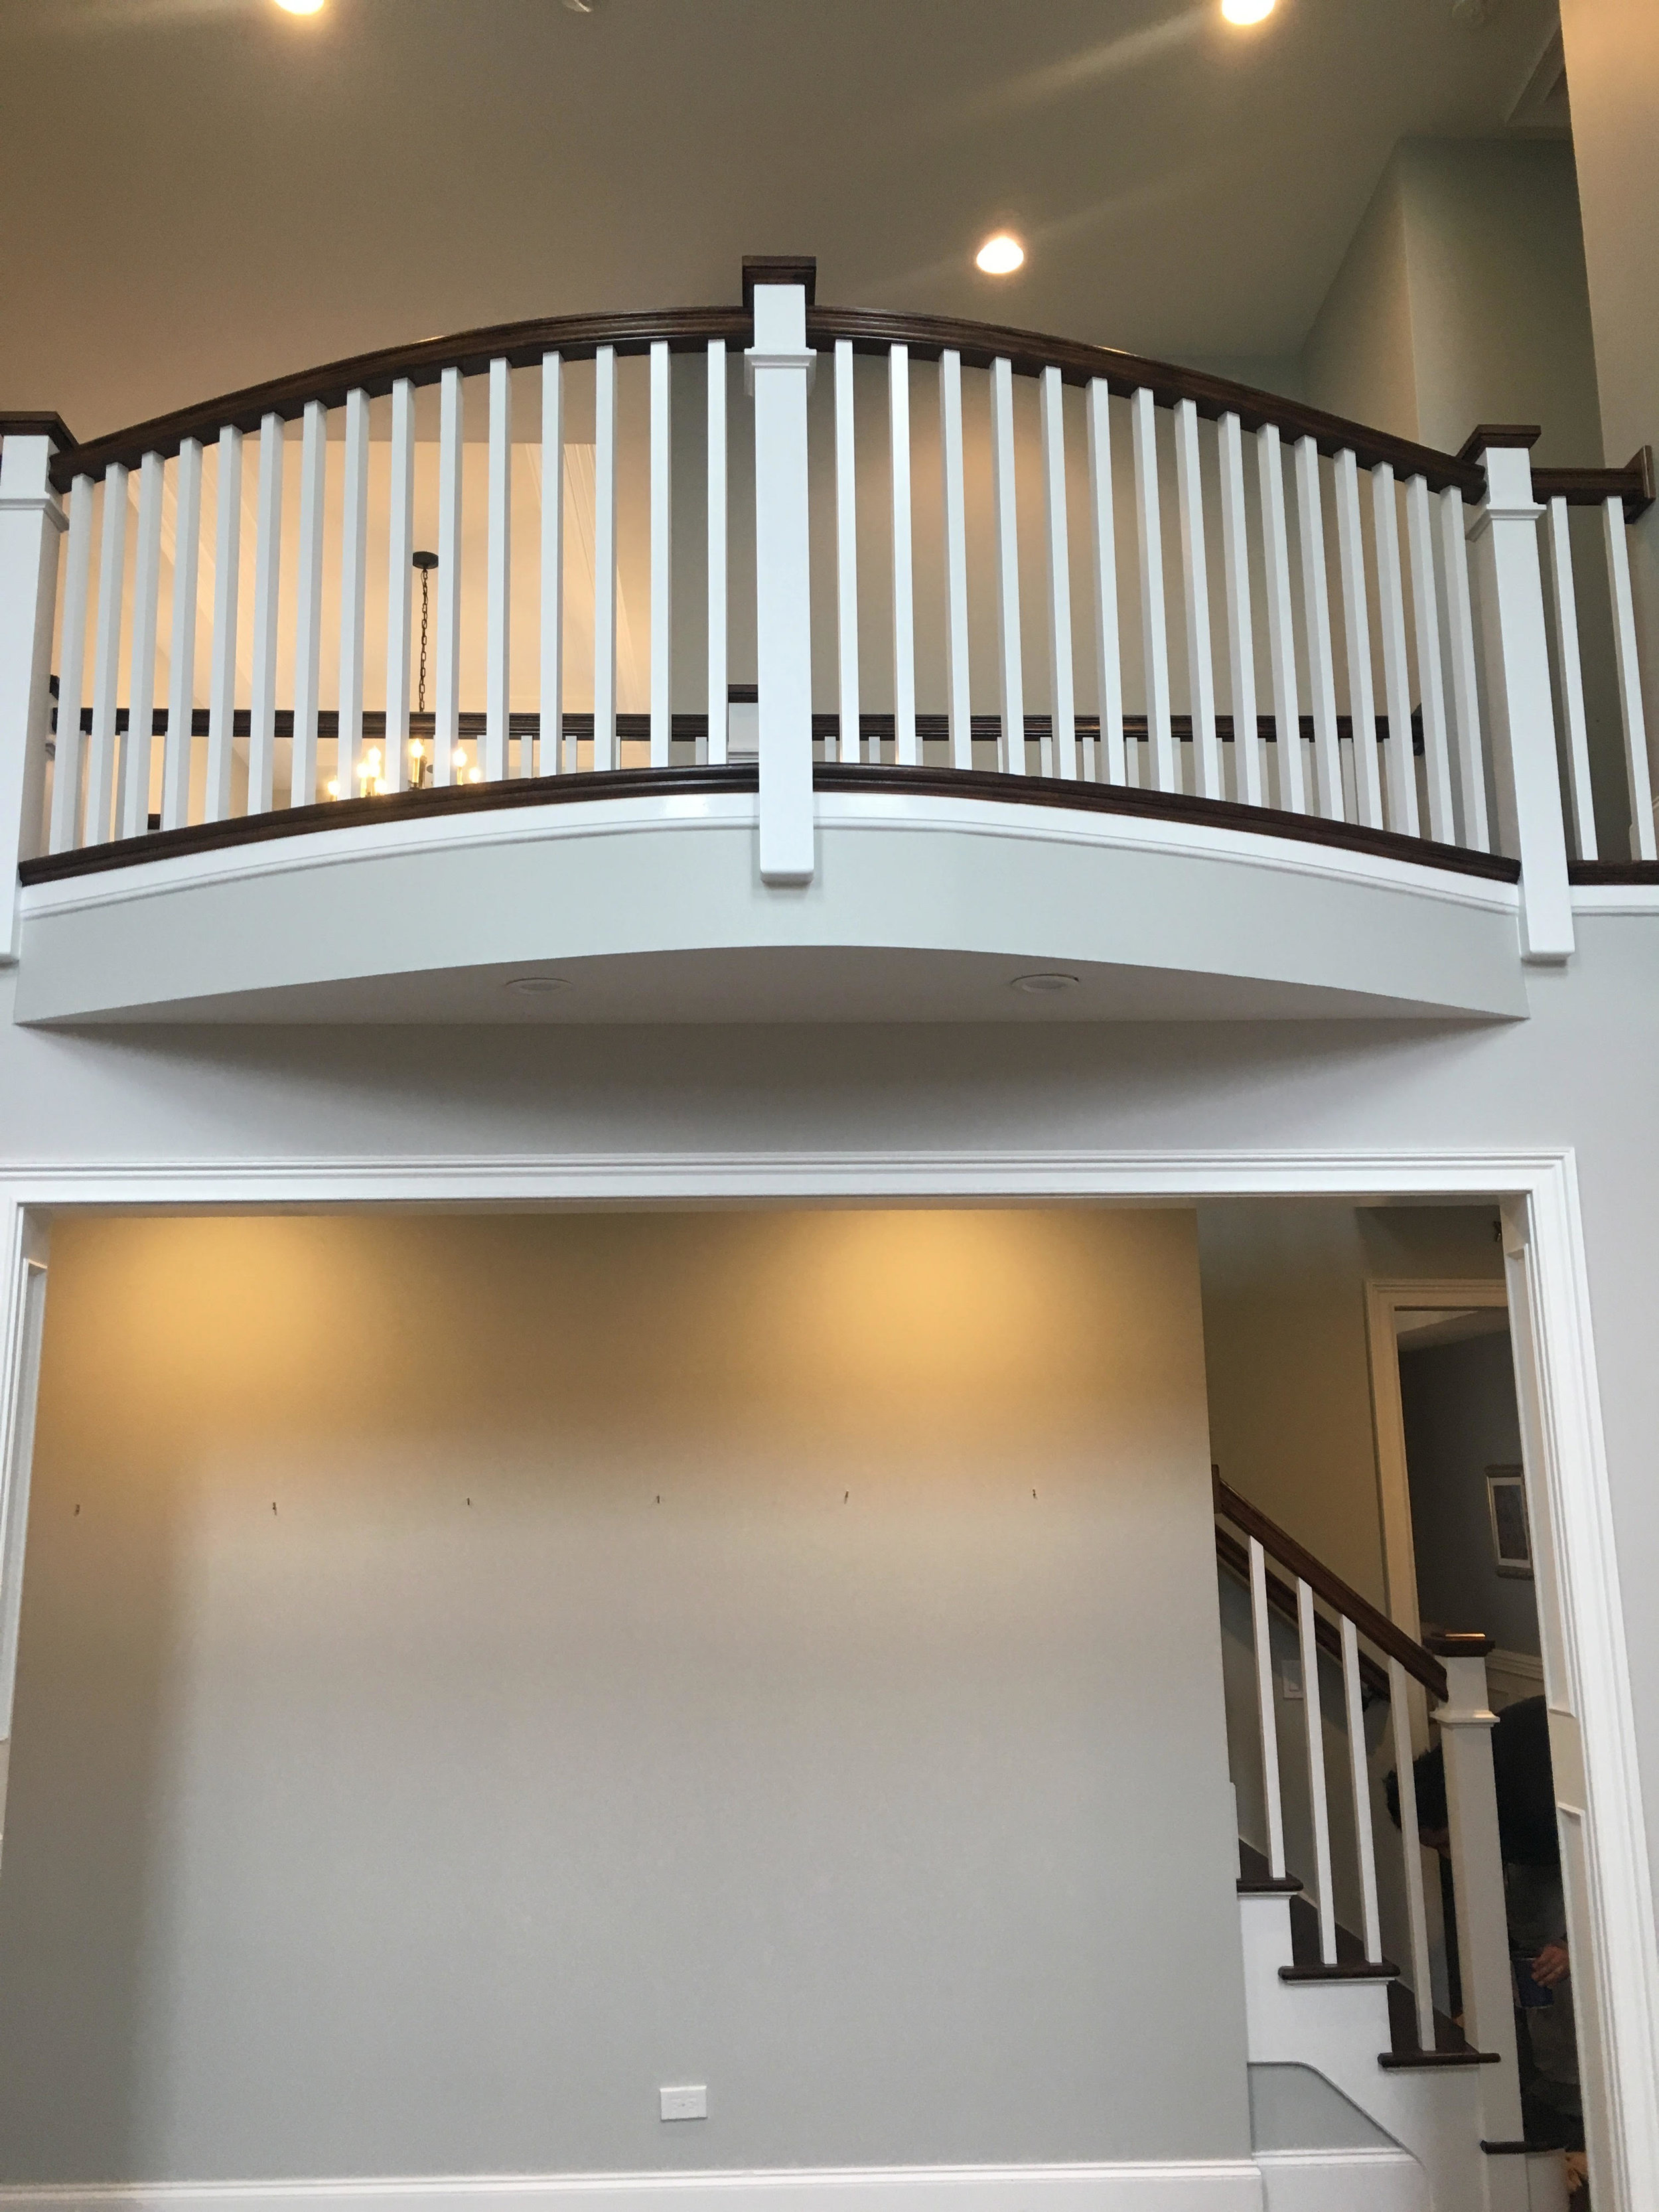 ARCHED BALCONY OVERLOOK REMODEL IN GLEN ELLYN IL.